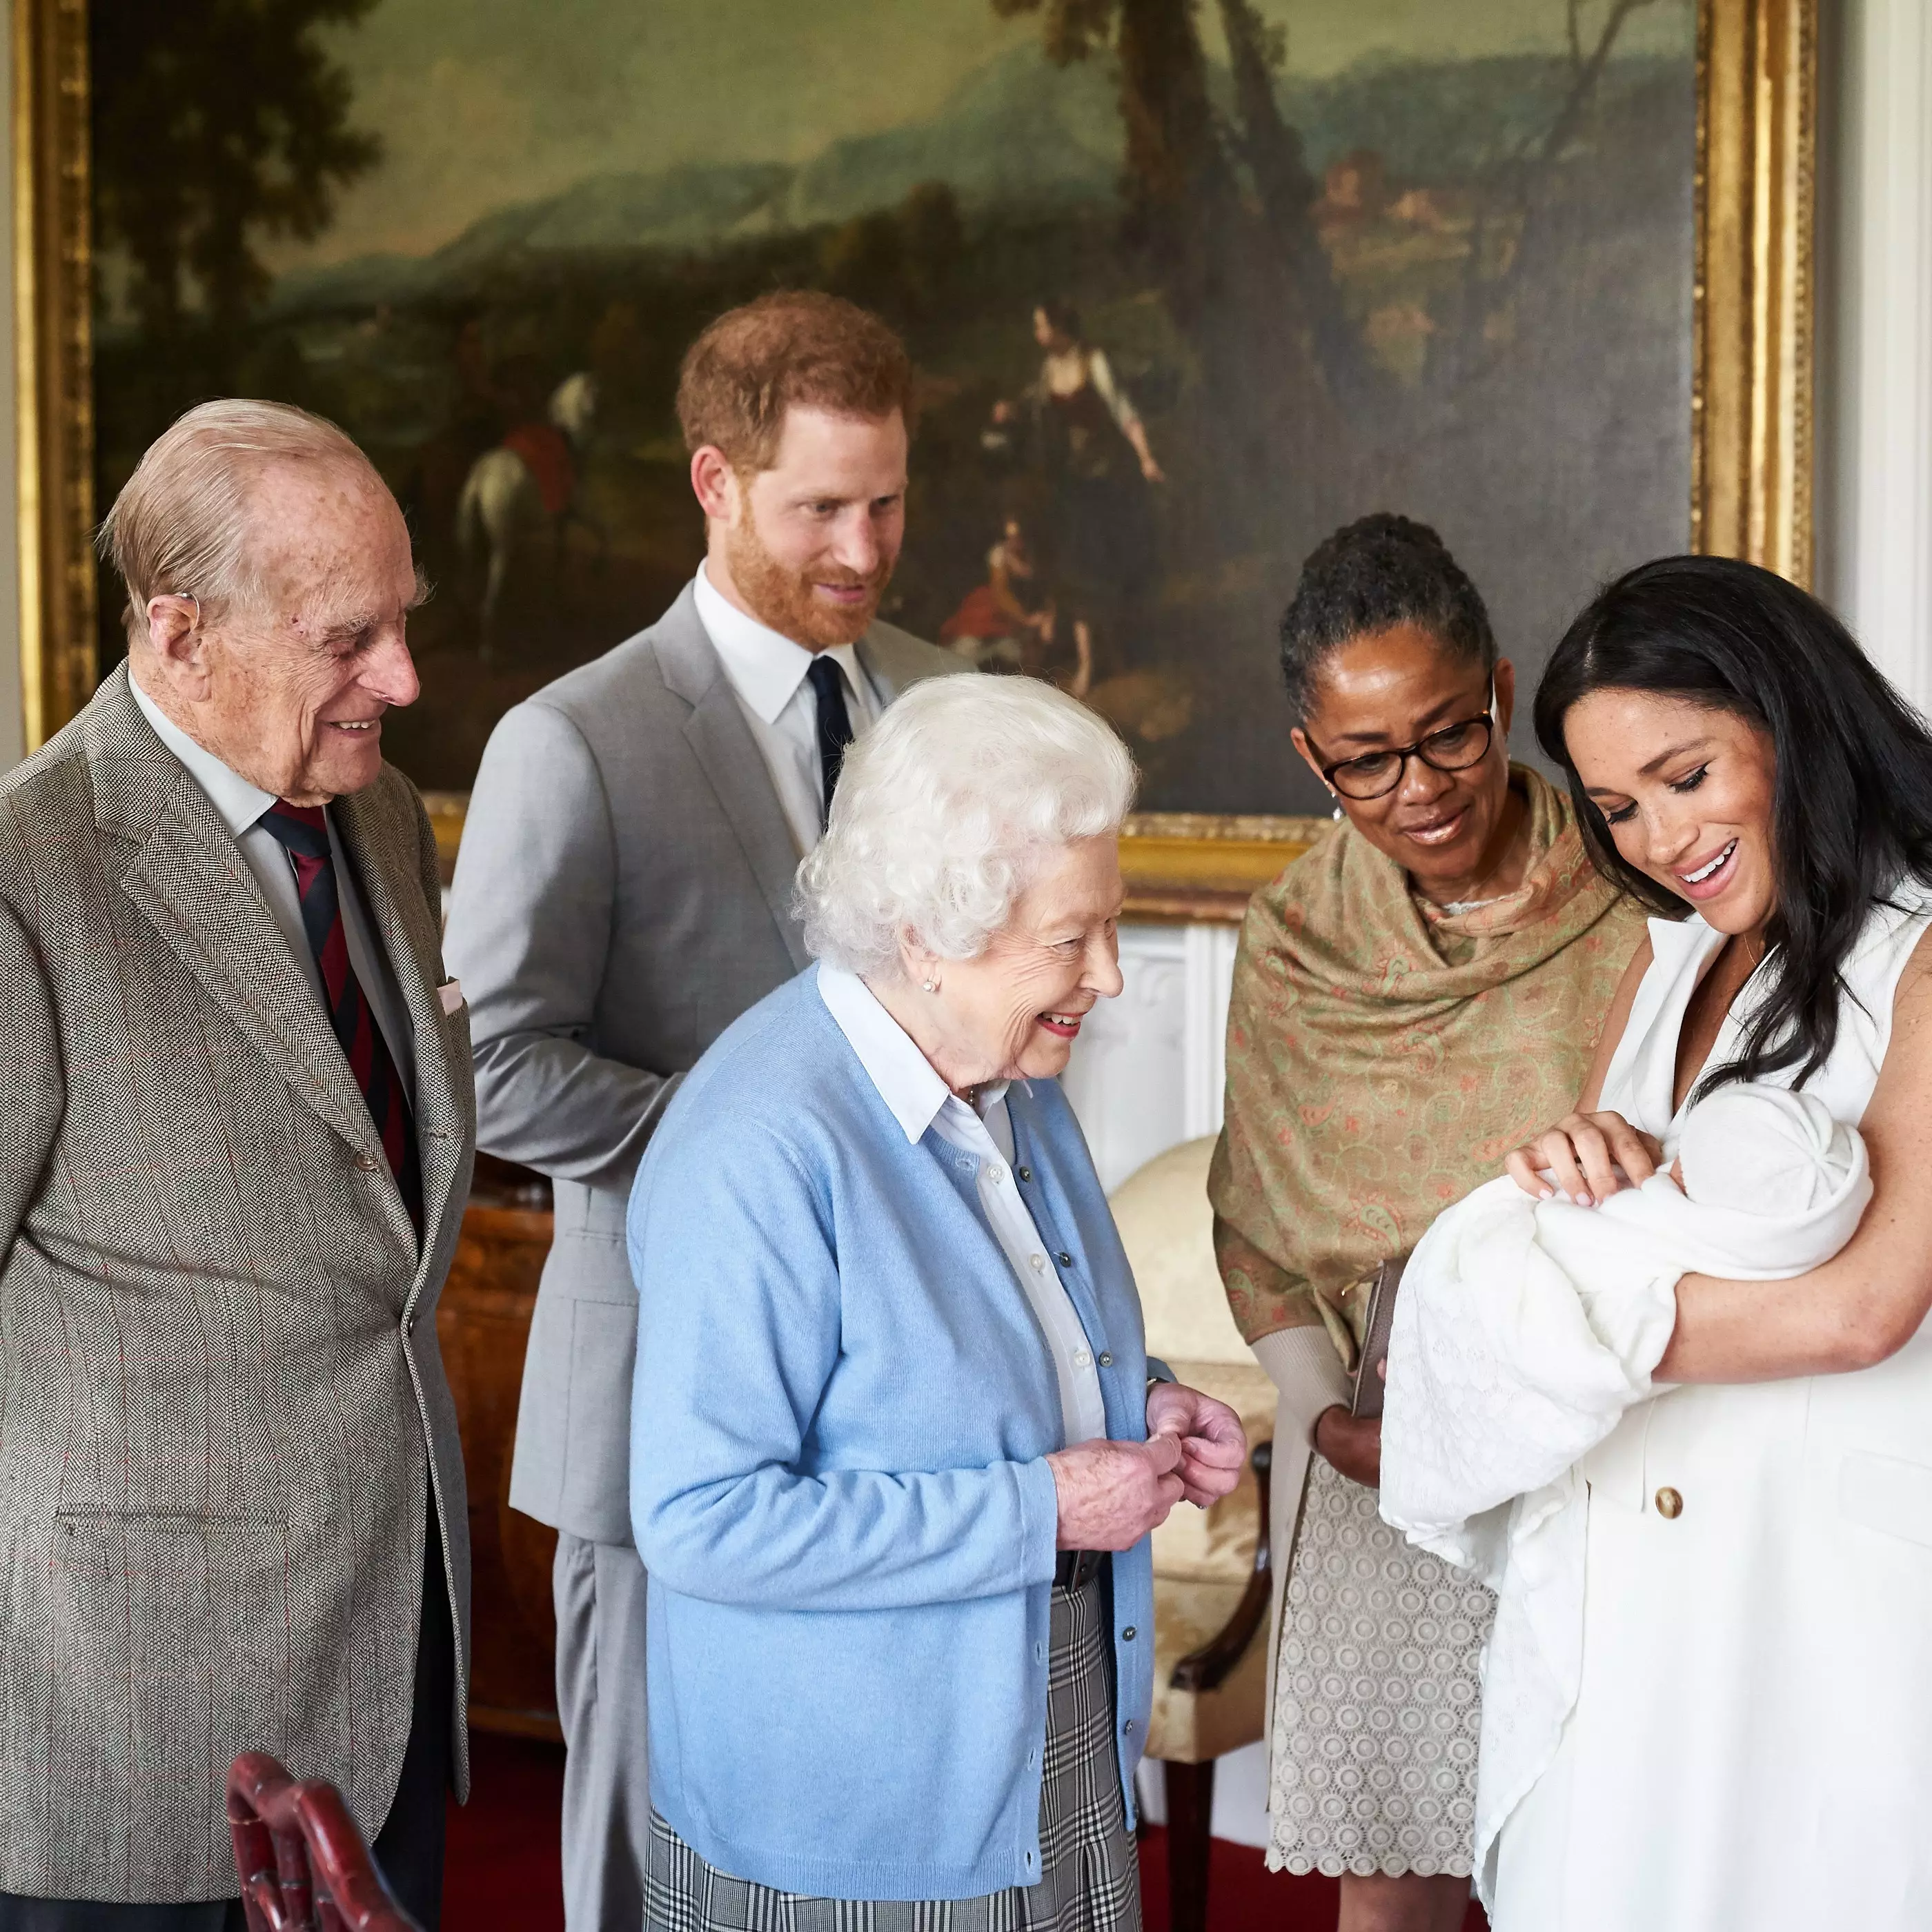 The Duke and Duchess of Sussex showing their son Archie Harrison Mountbatten-Windsor to the Queen and the Duke of Edinburgh.